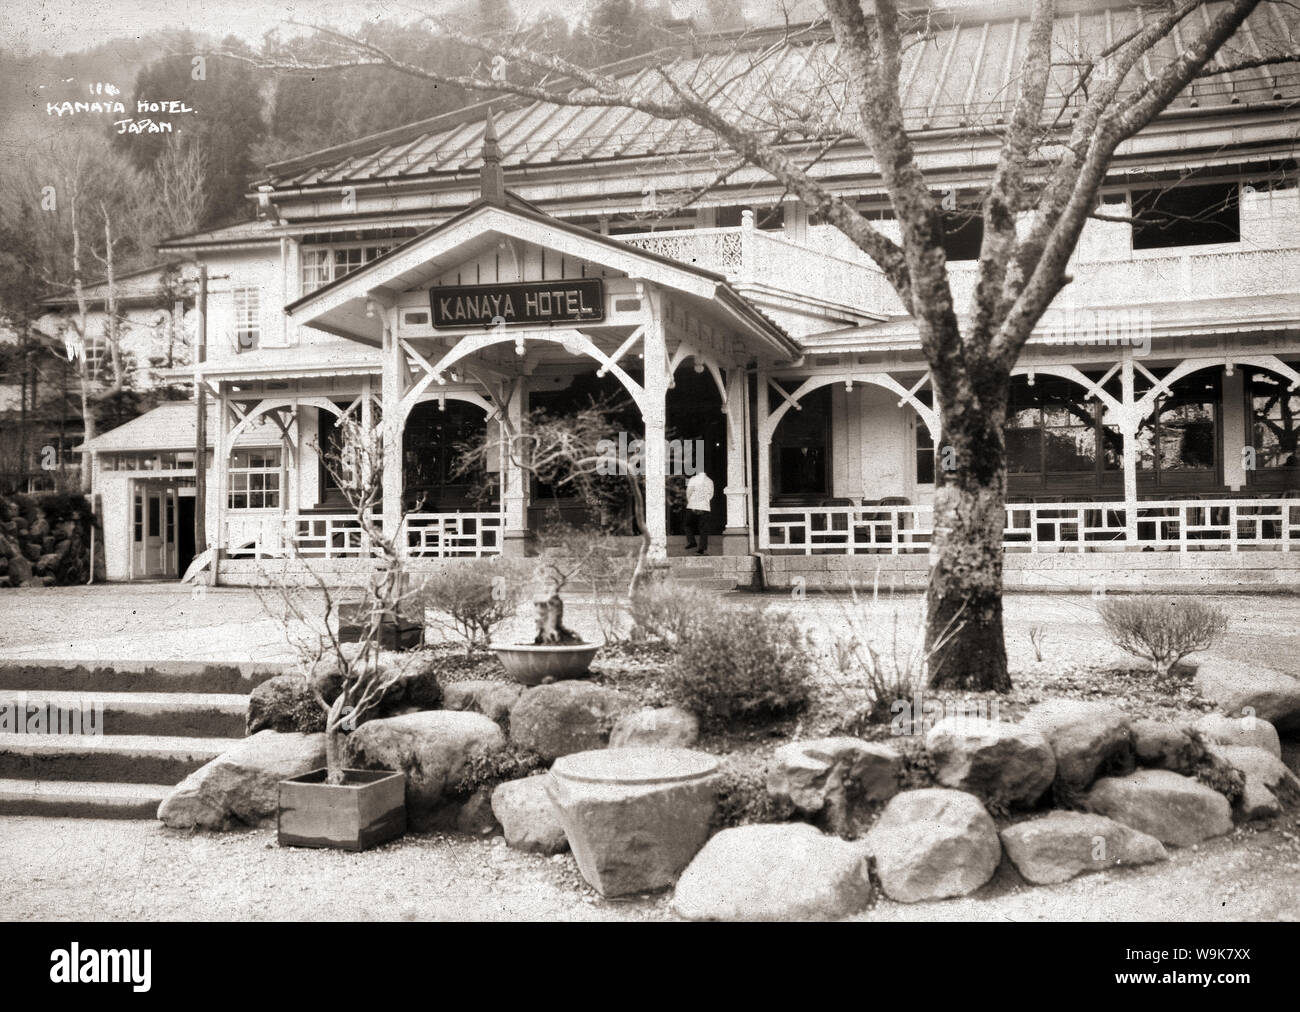 [ 1920s Japan - TITLE ] —   The Nikko Kanaya Hotel (日光金谷ホテル) in Nikko, Tochigi Prefecture. The hotel was founded by Zenichiro Kanaya (金谷善一郎 ) as the 'Cottage Inn' in 1873 (Meiji 6).   In 1892 (Meiji 26), Kanaya bought  the Mikado Hotel when it was still under construction. The following year he moved his hotel to the new location, pictured in this photo, and named it the Nikko Kanaya Hotel. The hotel had two floors and thirty rooms. Together with the Nikko Hotel, with which it competed fiercely, it was Nikko’s top Western style hotel.  20th century vintage glass negative. Stock Photo